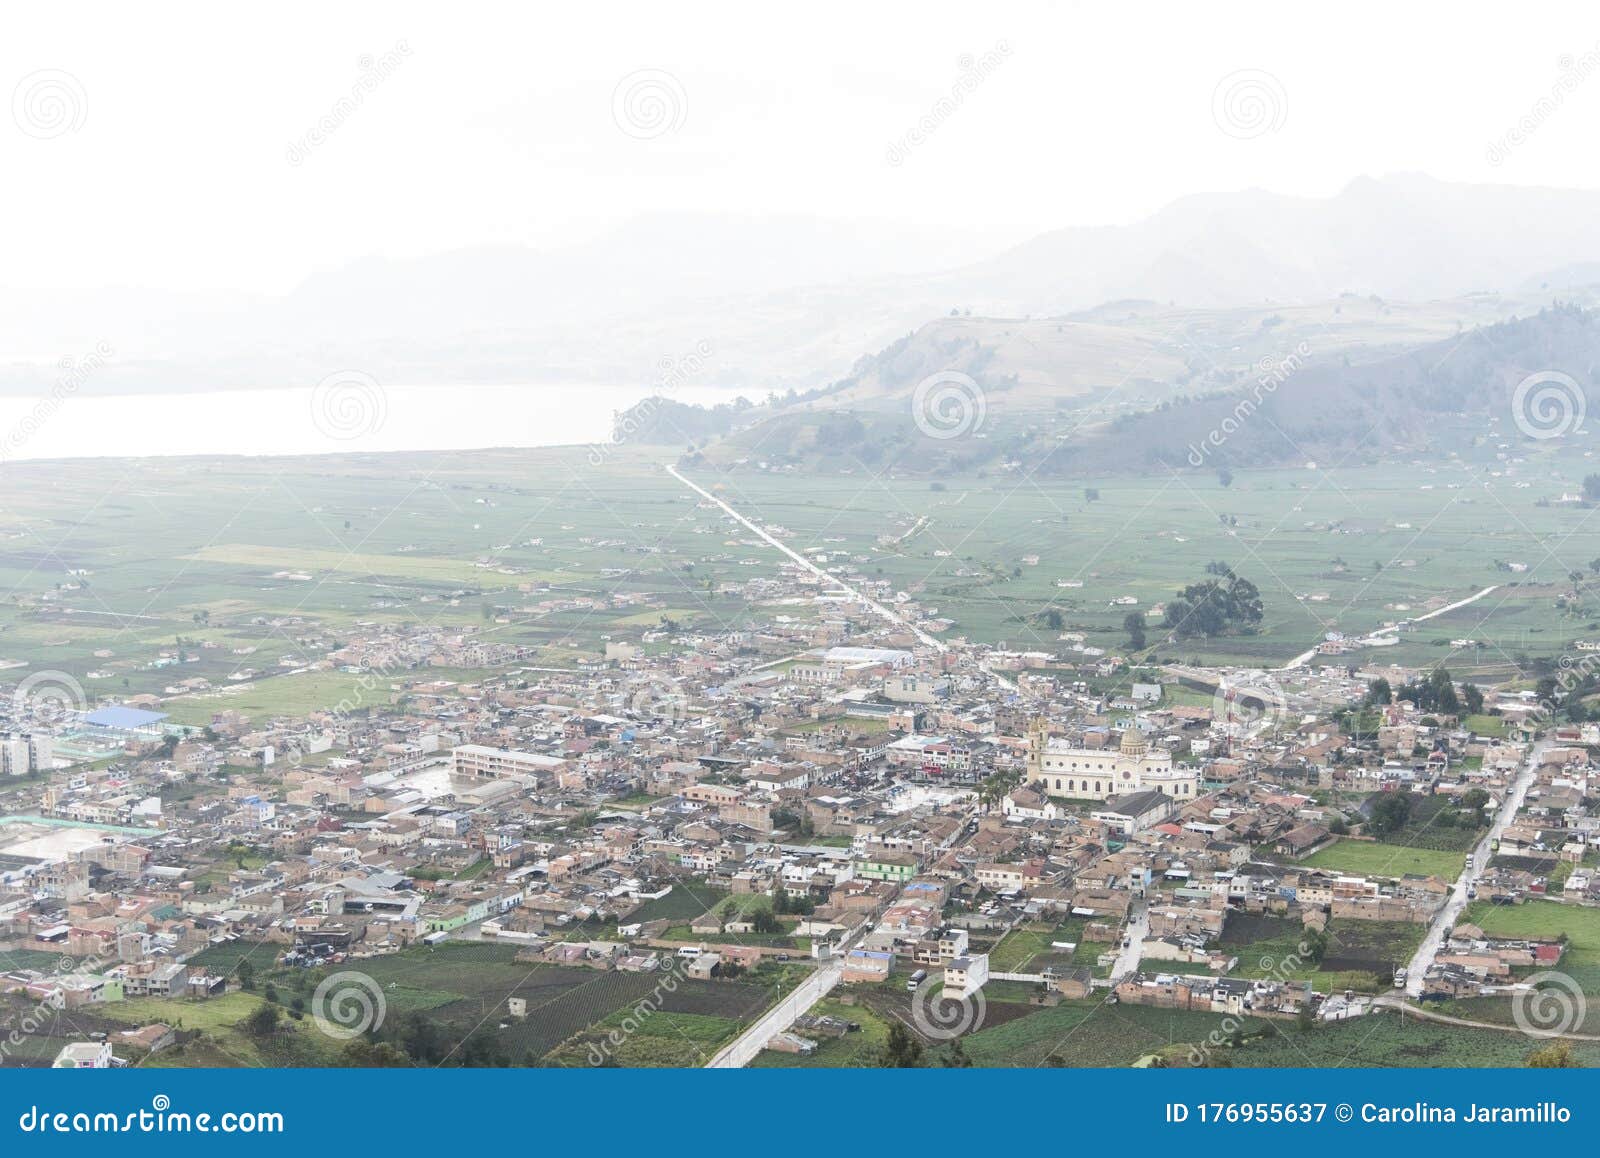 panoramic view of aquitania, boyaca, colombia, and the fields that surround it